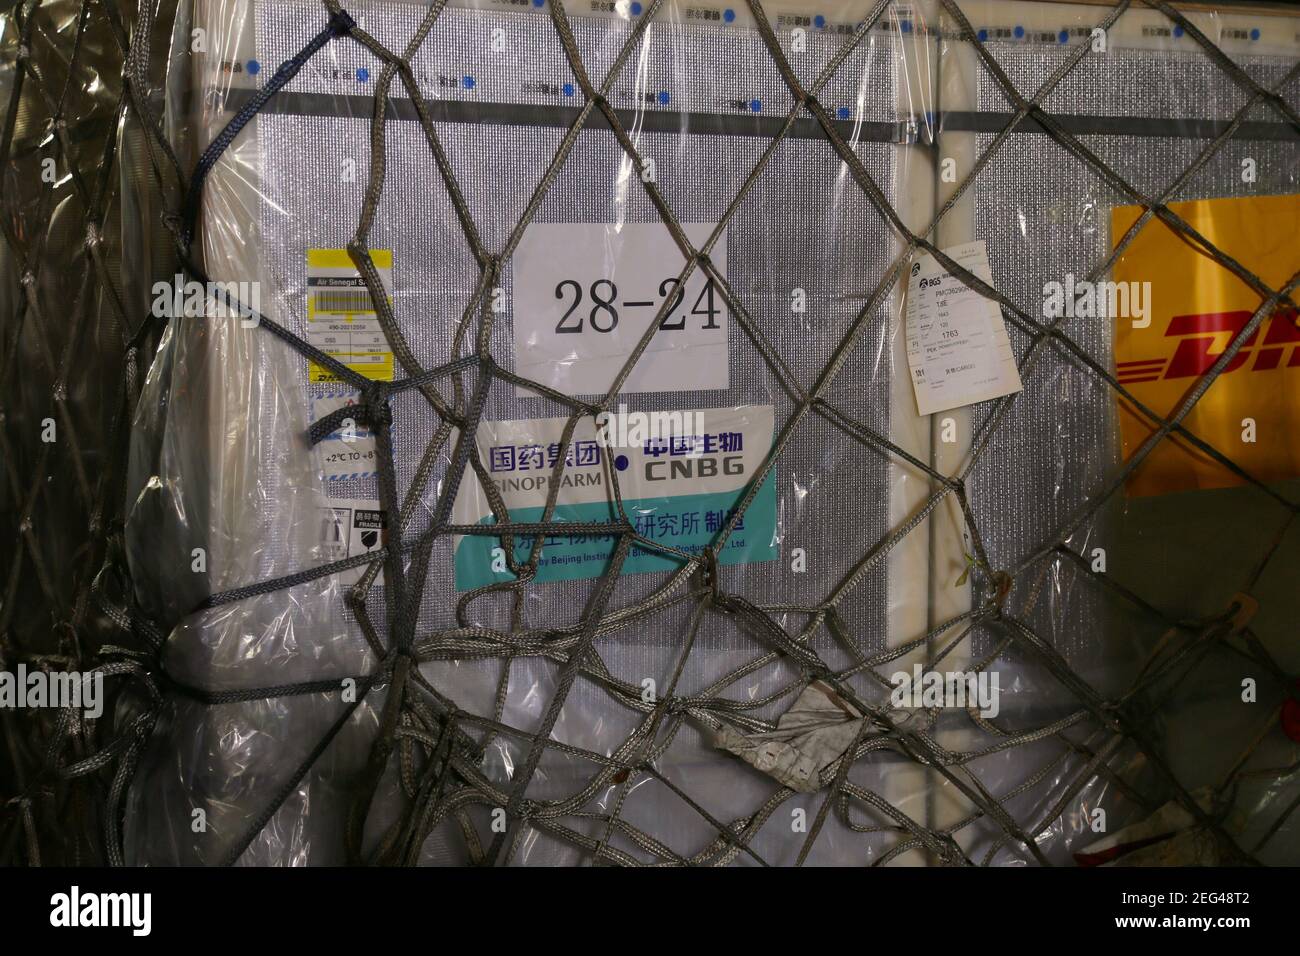 Dakar. 17th Feb, 2021. Photo taken on Feb. 17, 2021 shows the first batch of China's Sinopharm COVID-19 vaccine at Blaise Diagne International Airport in Dakar, Senegal. Senegal on Wednesday night received the first batch of China's Sinopharm COVID-19 vaccine. Credit: Xing Jianqiao/Xinhua/Alamy Live News Stock Photo